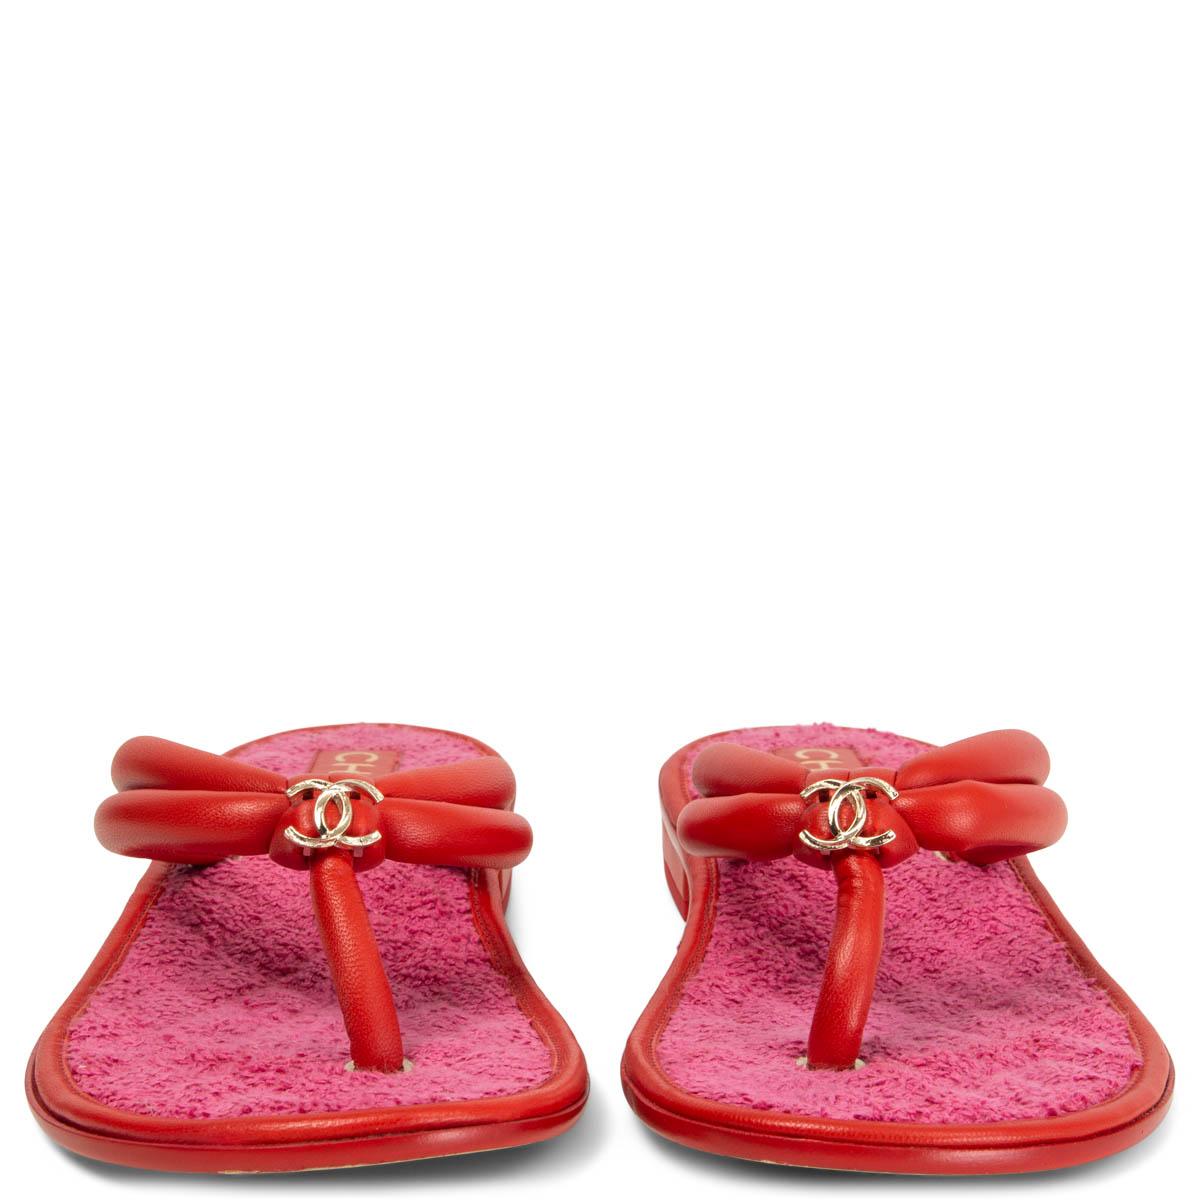 100% authentic Chanel CC thong sandals in red smooth leather with pink terry cloth lining. Have been worn once ot twice and are in excellent condition. Comes with dust bag. 

Measurements
Imprinted Size	38.5C
Shoe Size	38.5
Inside Sole	25.5cm